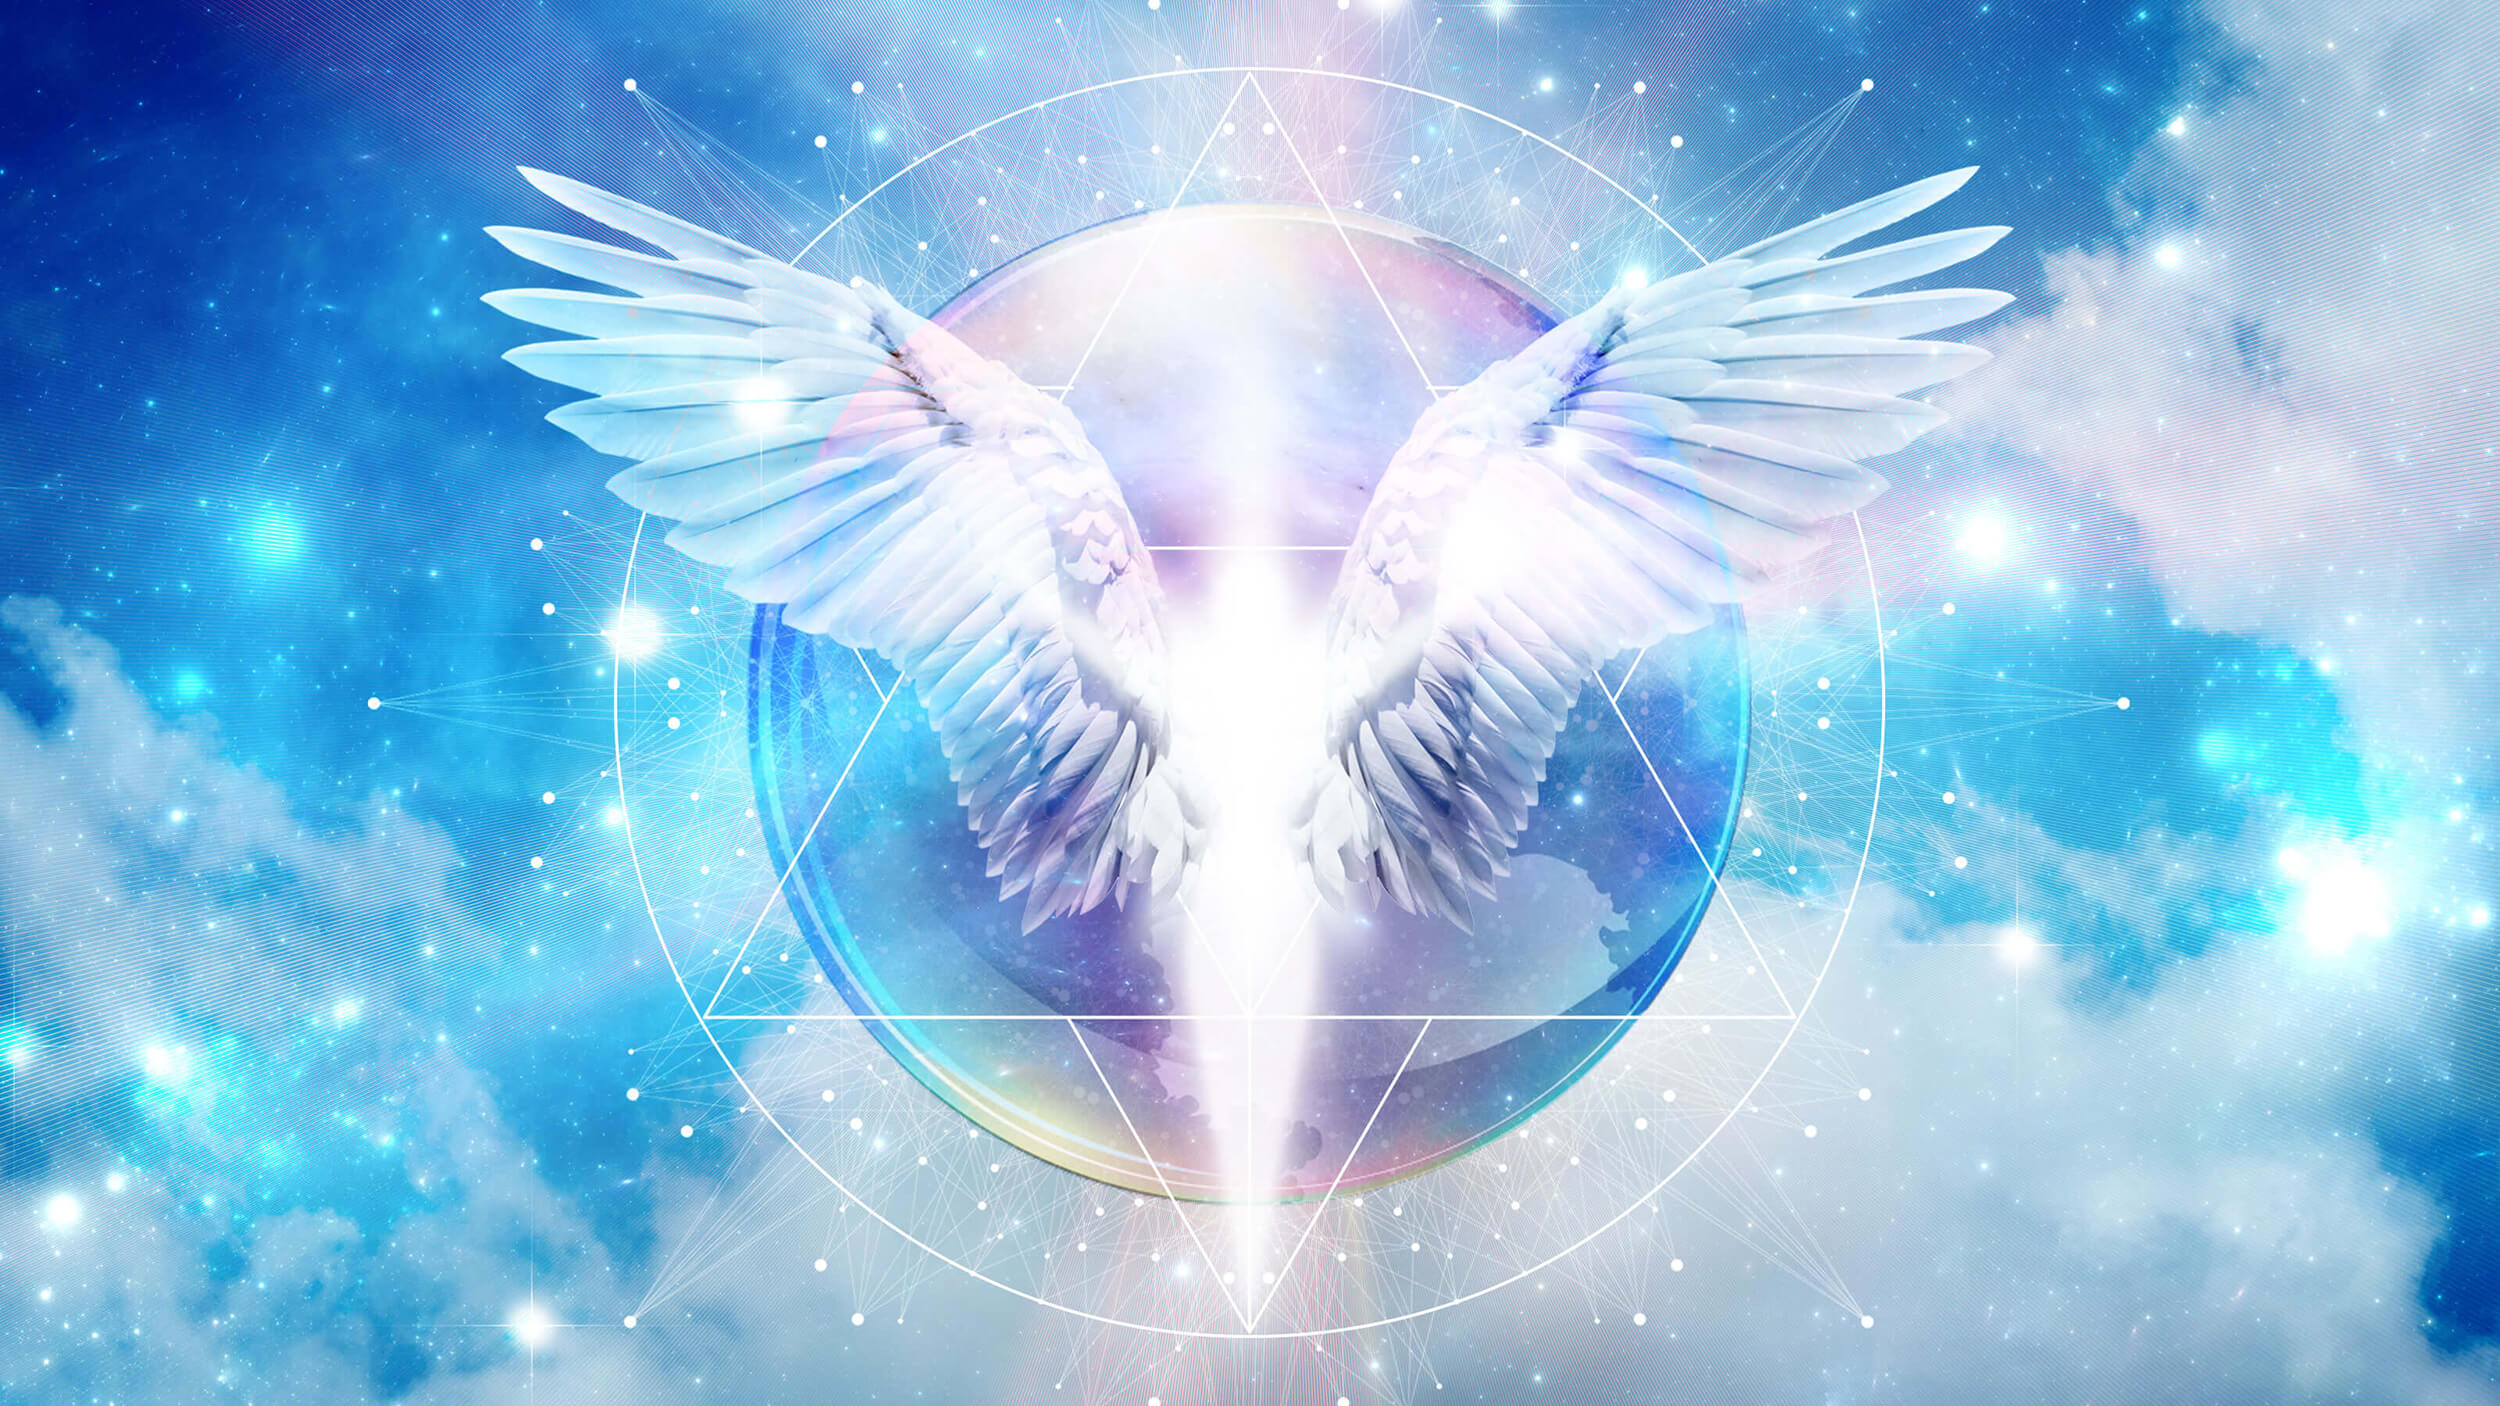 Archangels And Angels - The Messengers Of God